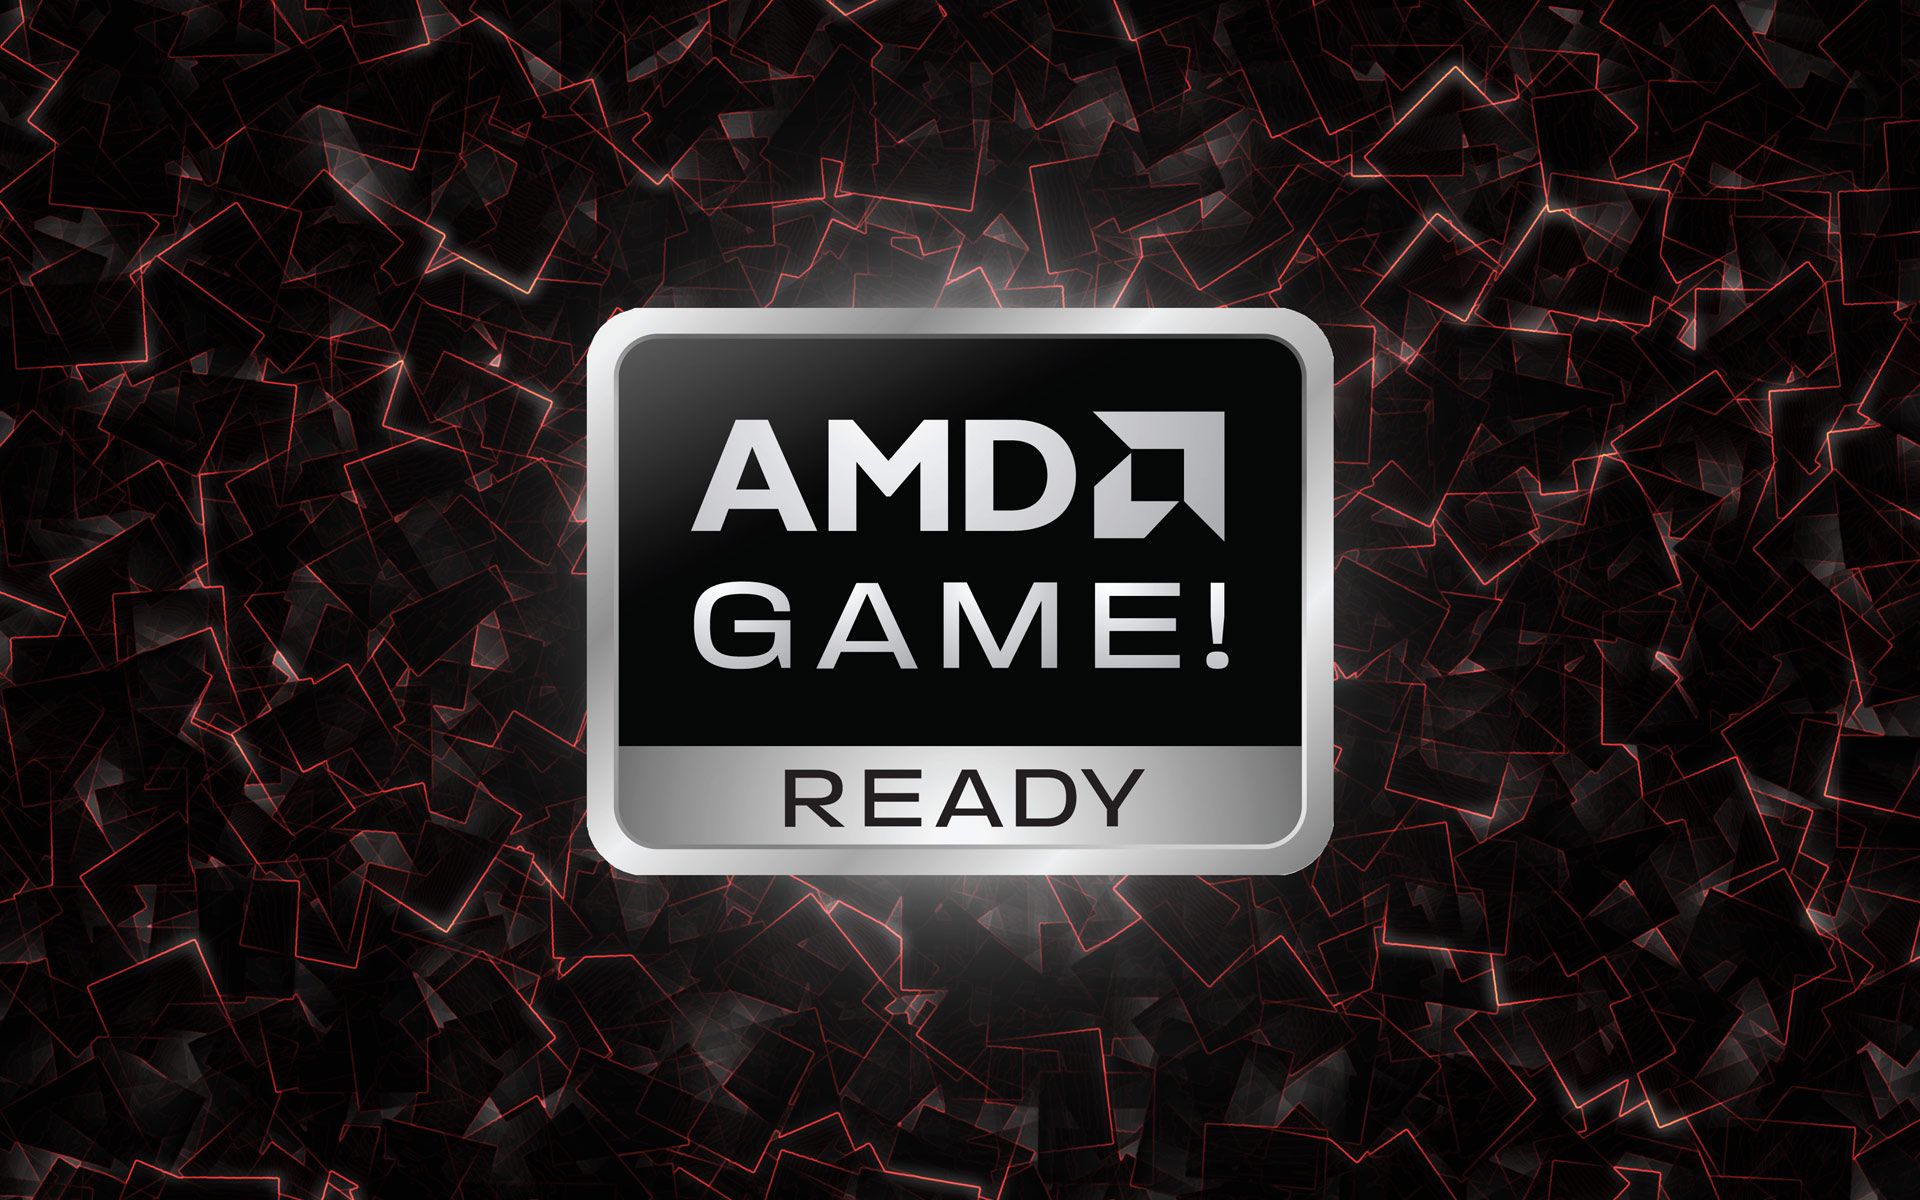 Ready, logo, amd, game, wallpaper, computers